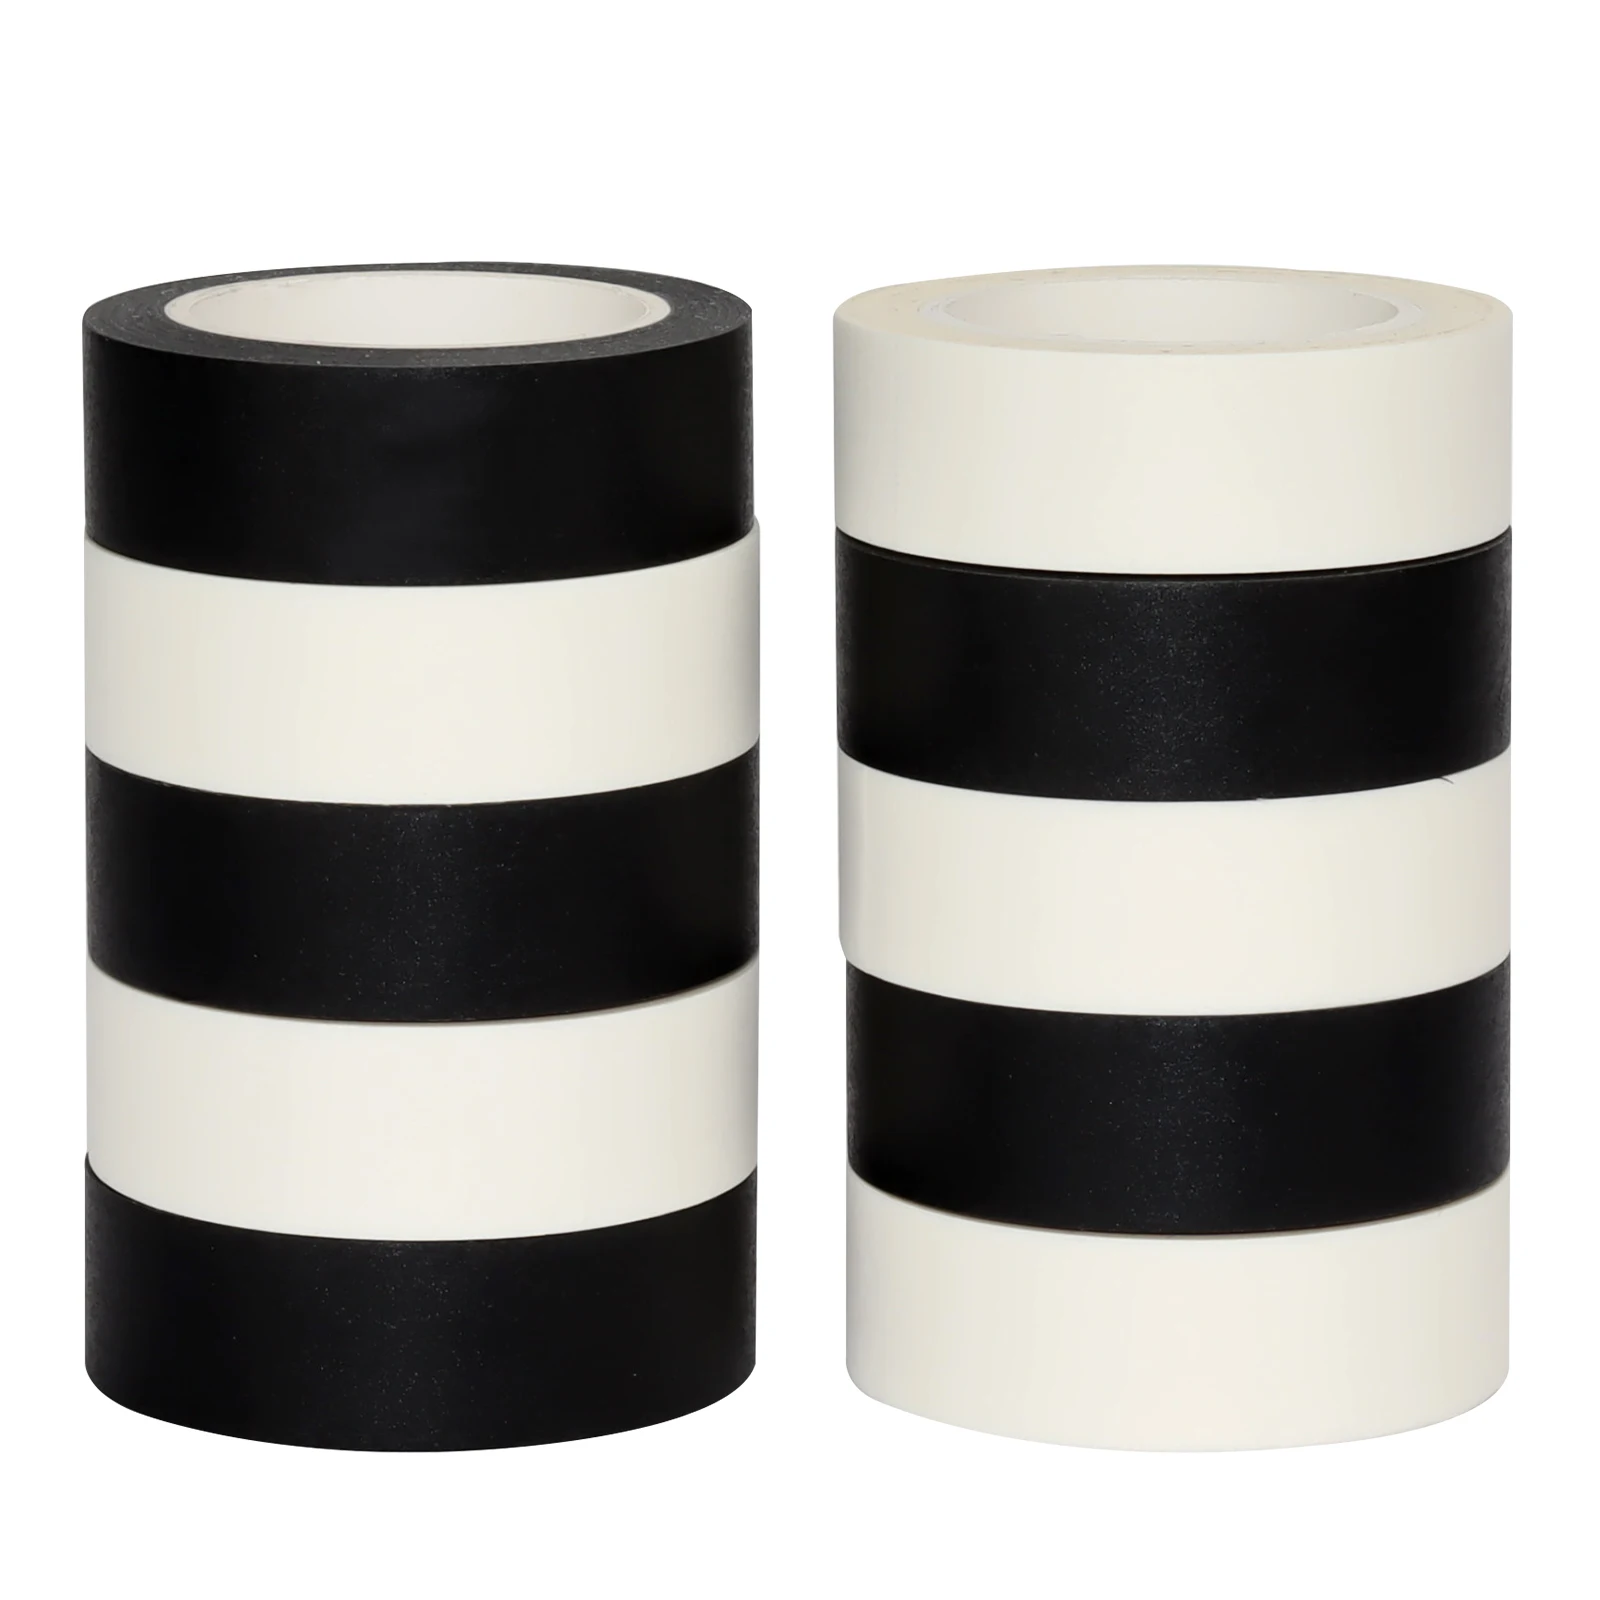 Solid Color Washi Tape Set Can Be Written Multi-Purpose Masking Tape Black And White 5 Each 10Pcs/Box